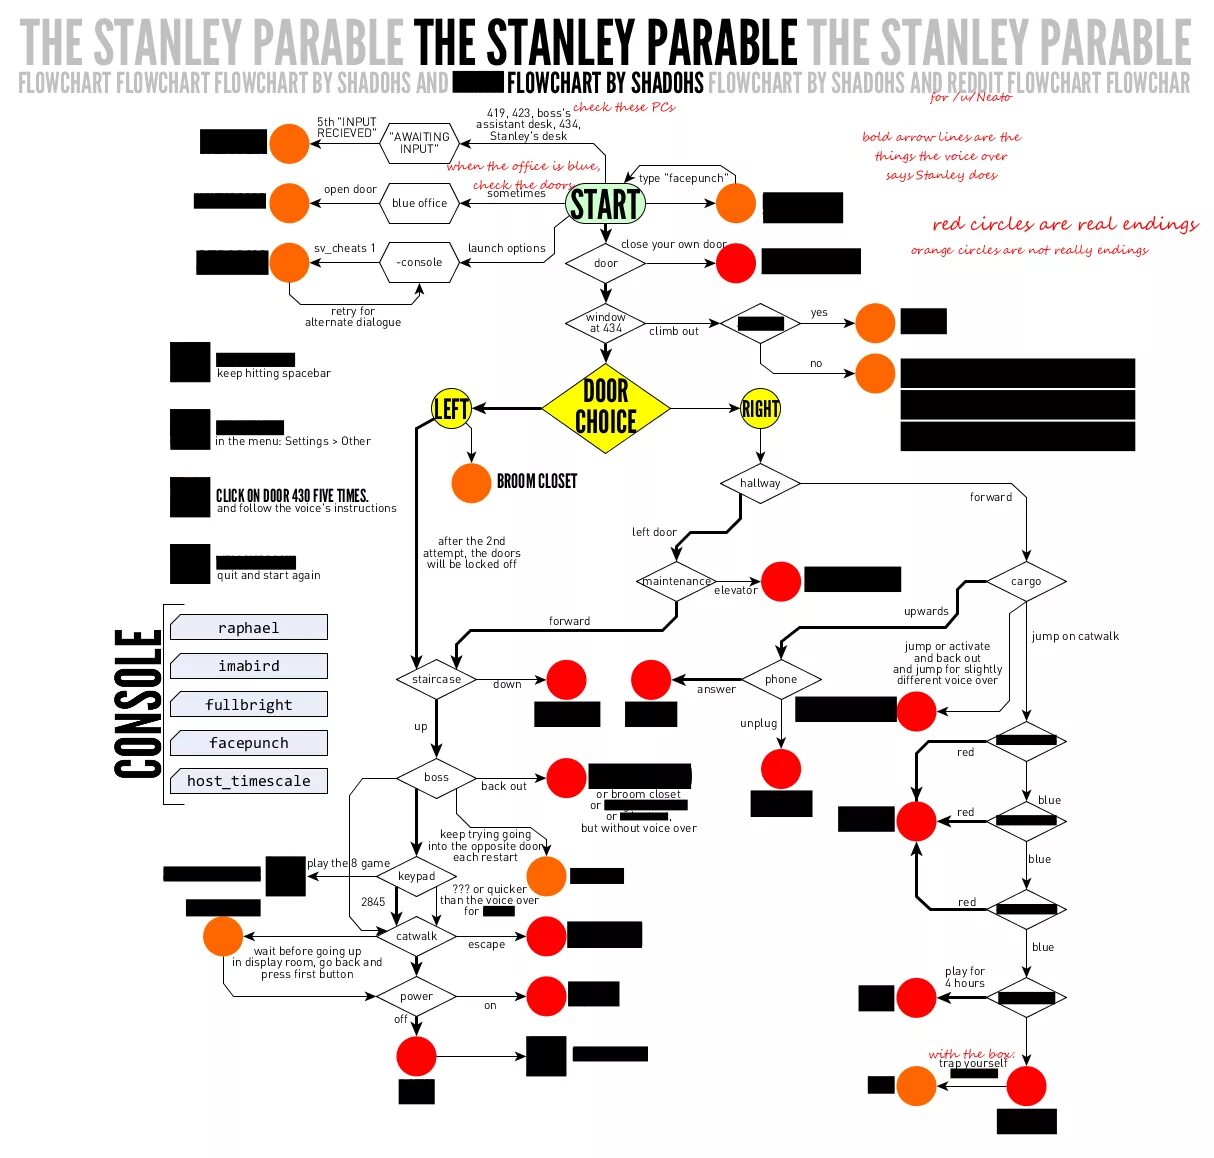 The Stanley Parable Стэнли. The Stanley Parable концовки. The Stanley Parable карта концовок. The Stanley Parable концовки схема. Stanley parable deluxe концовки